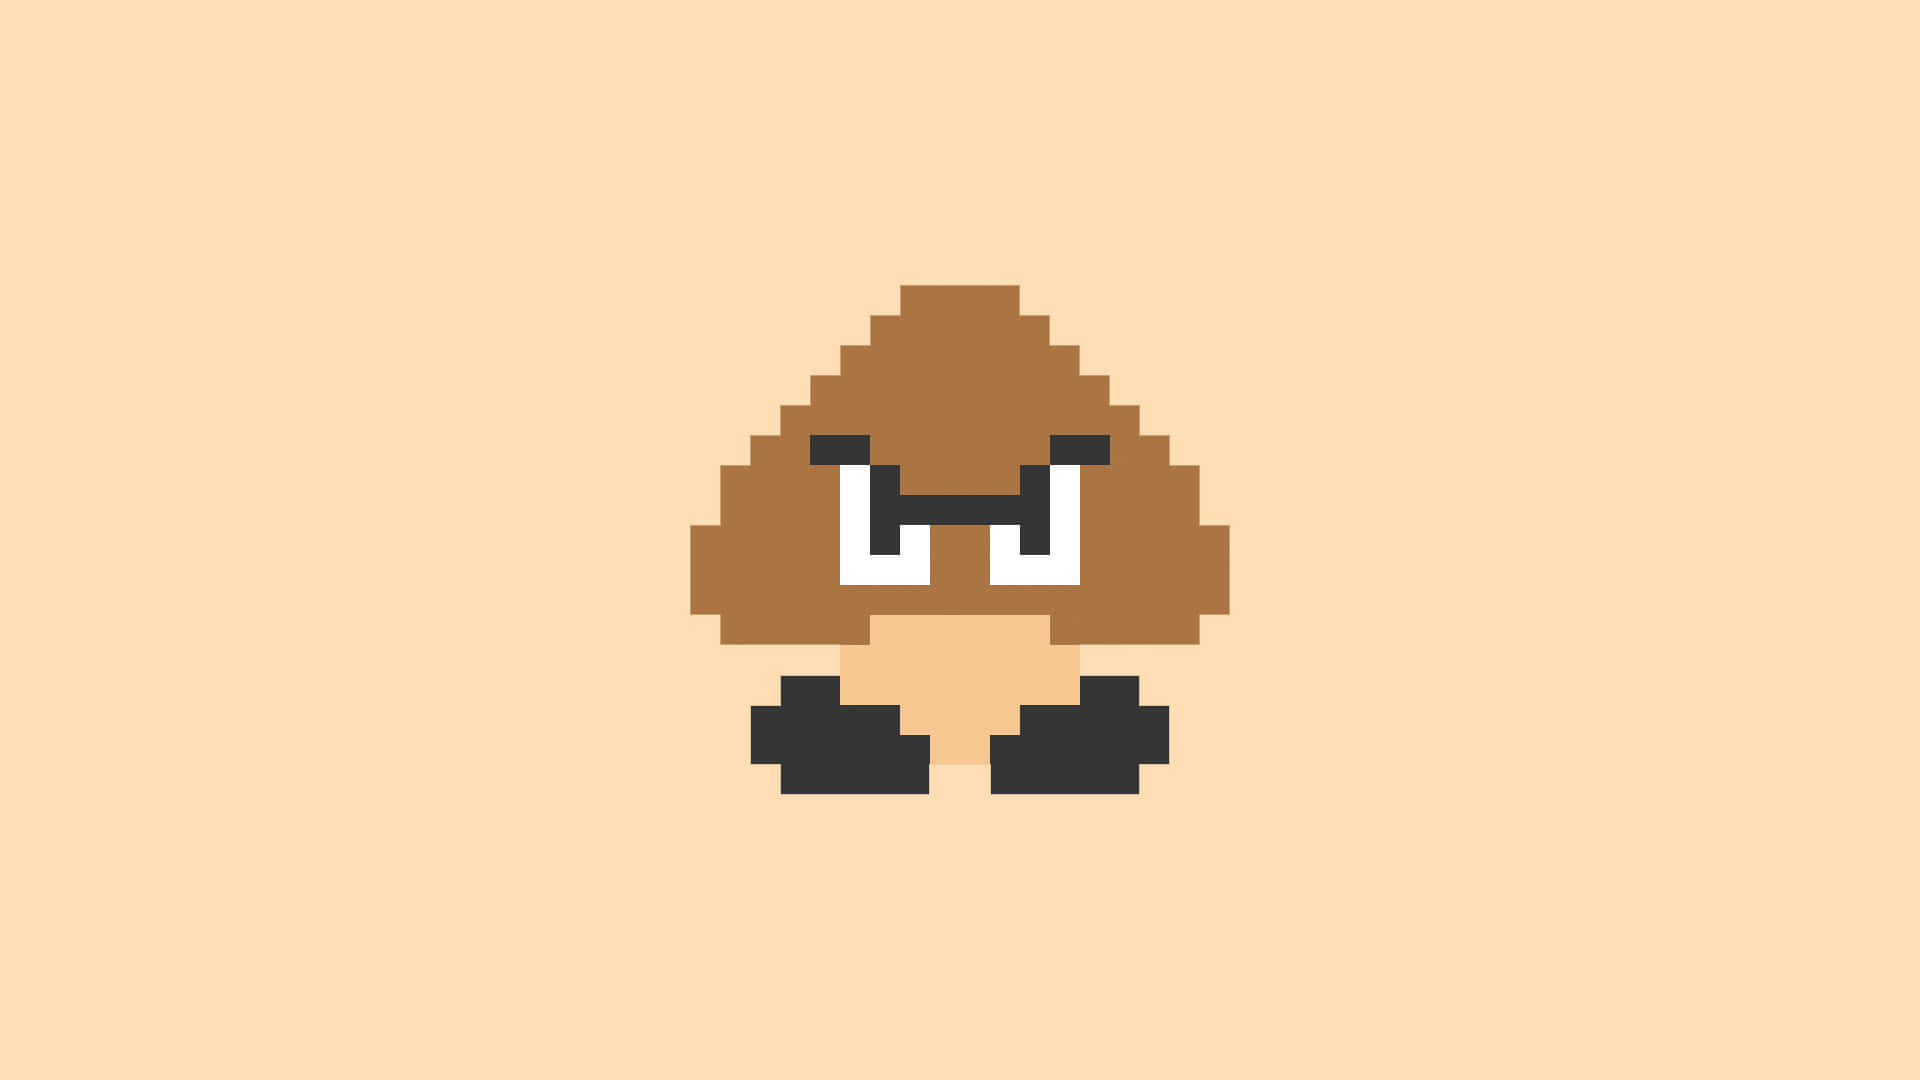 Goomba Character from Super Mario Game Wallpaper